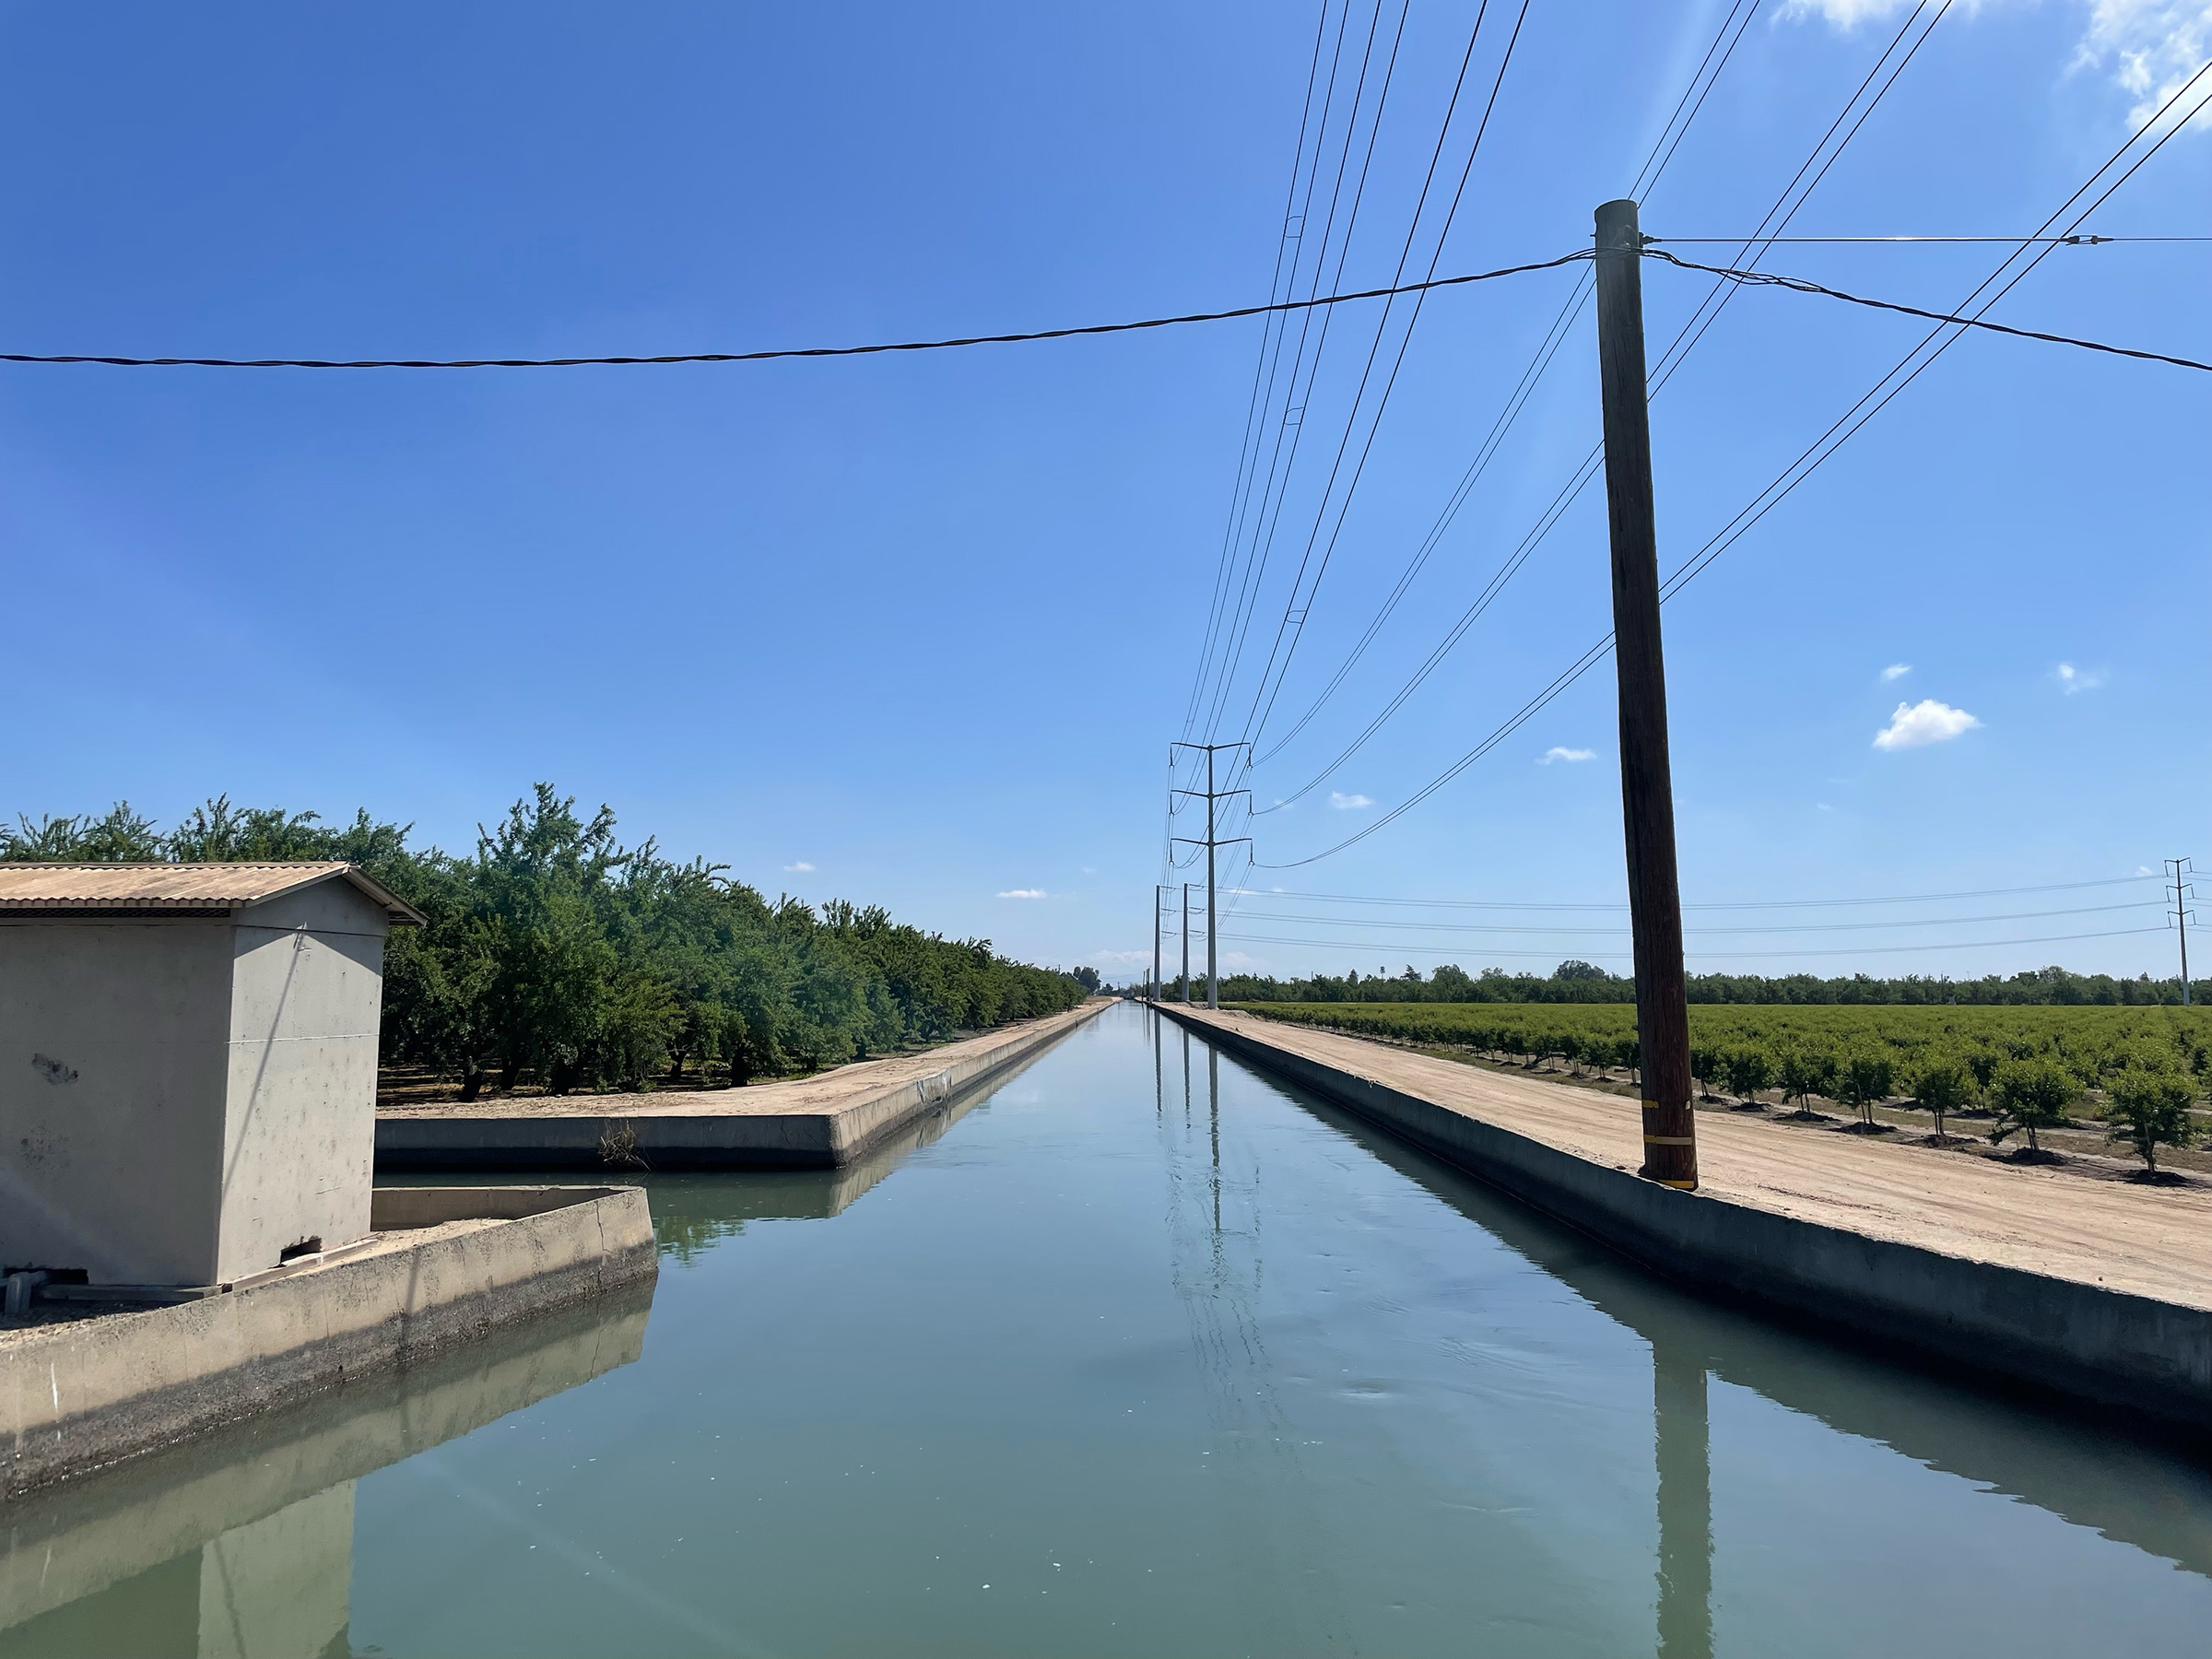 Narrow canal at site proposed for prototype in the Turlock Irrigation district.